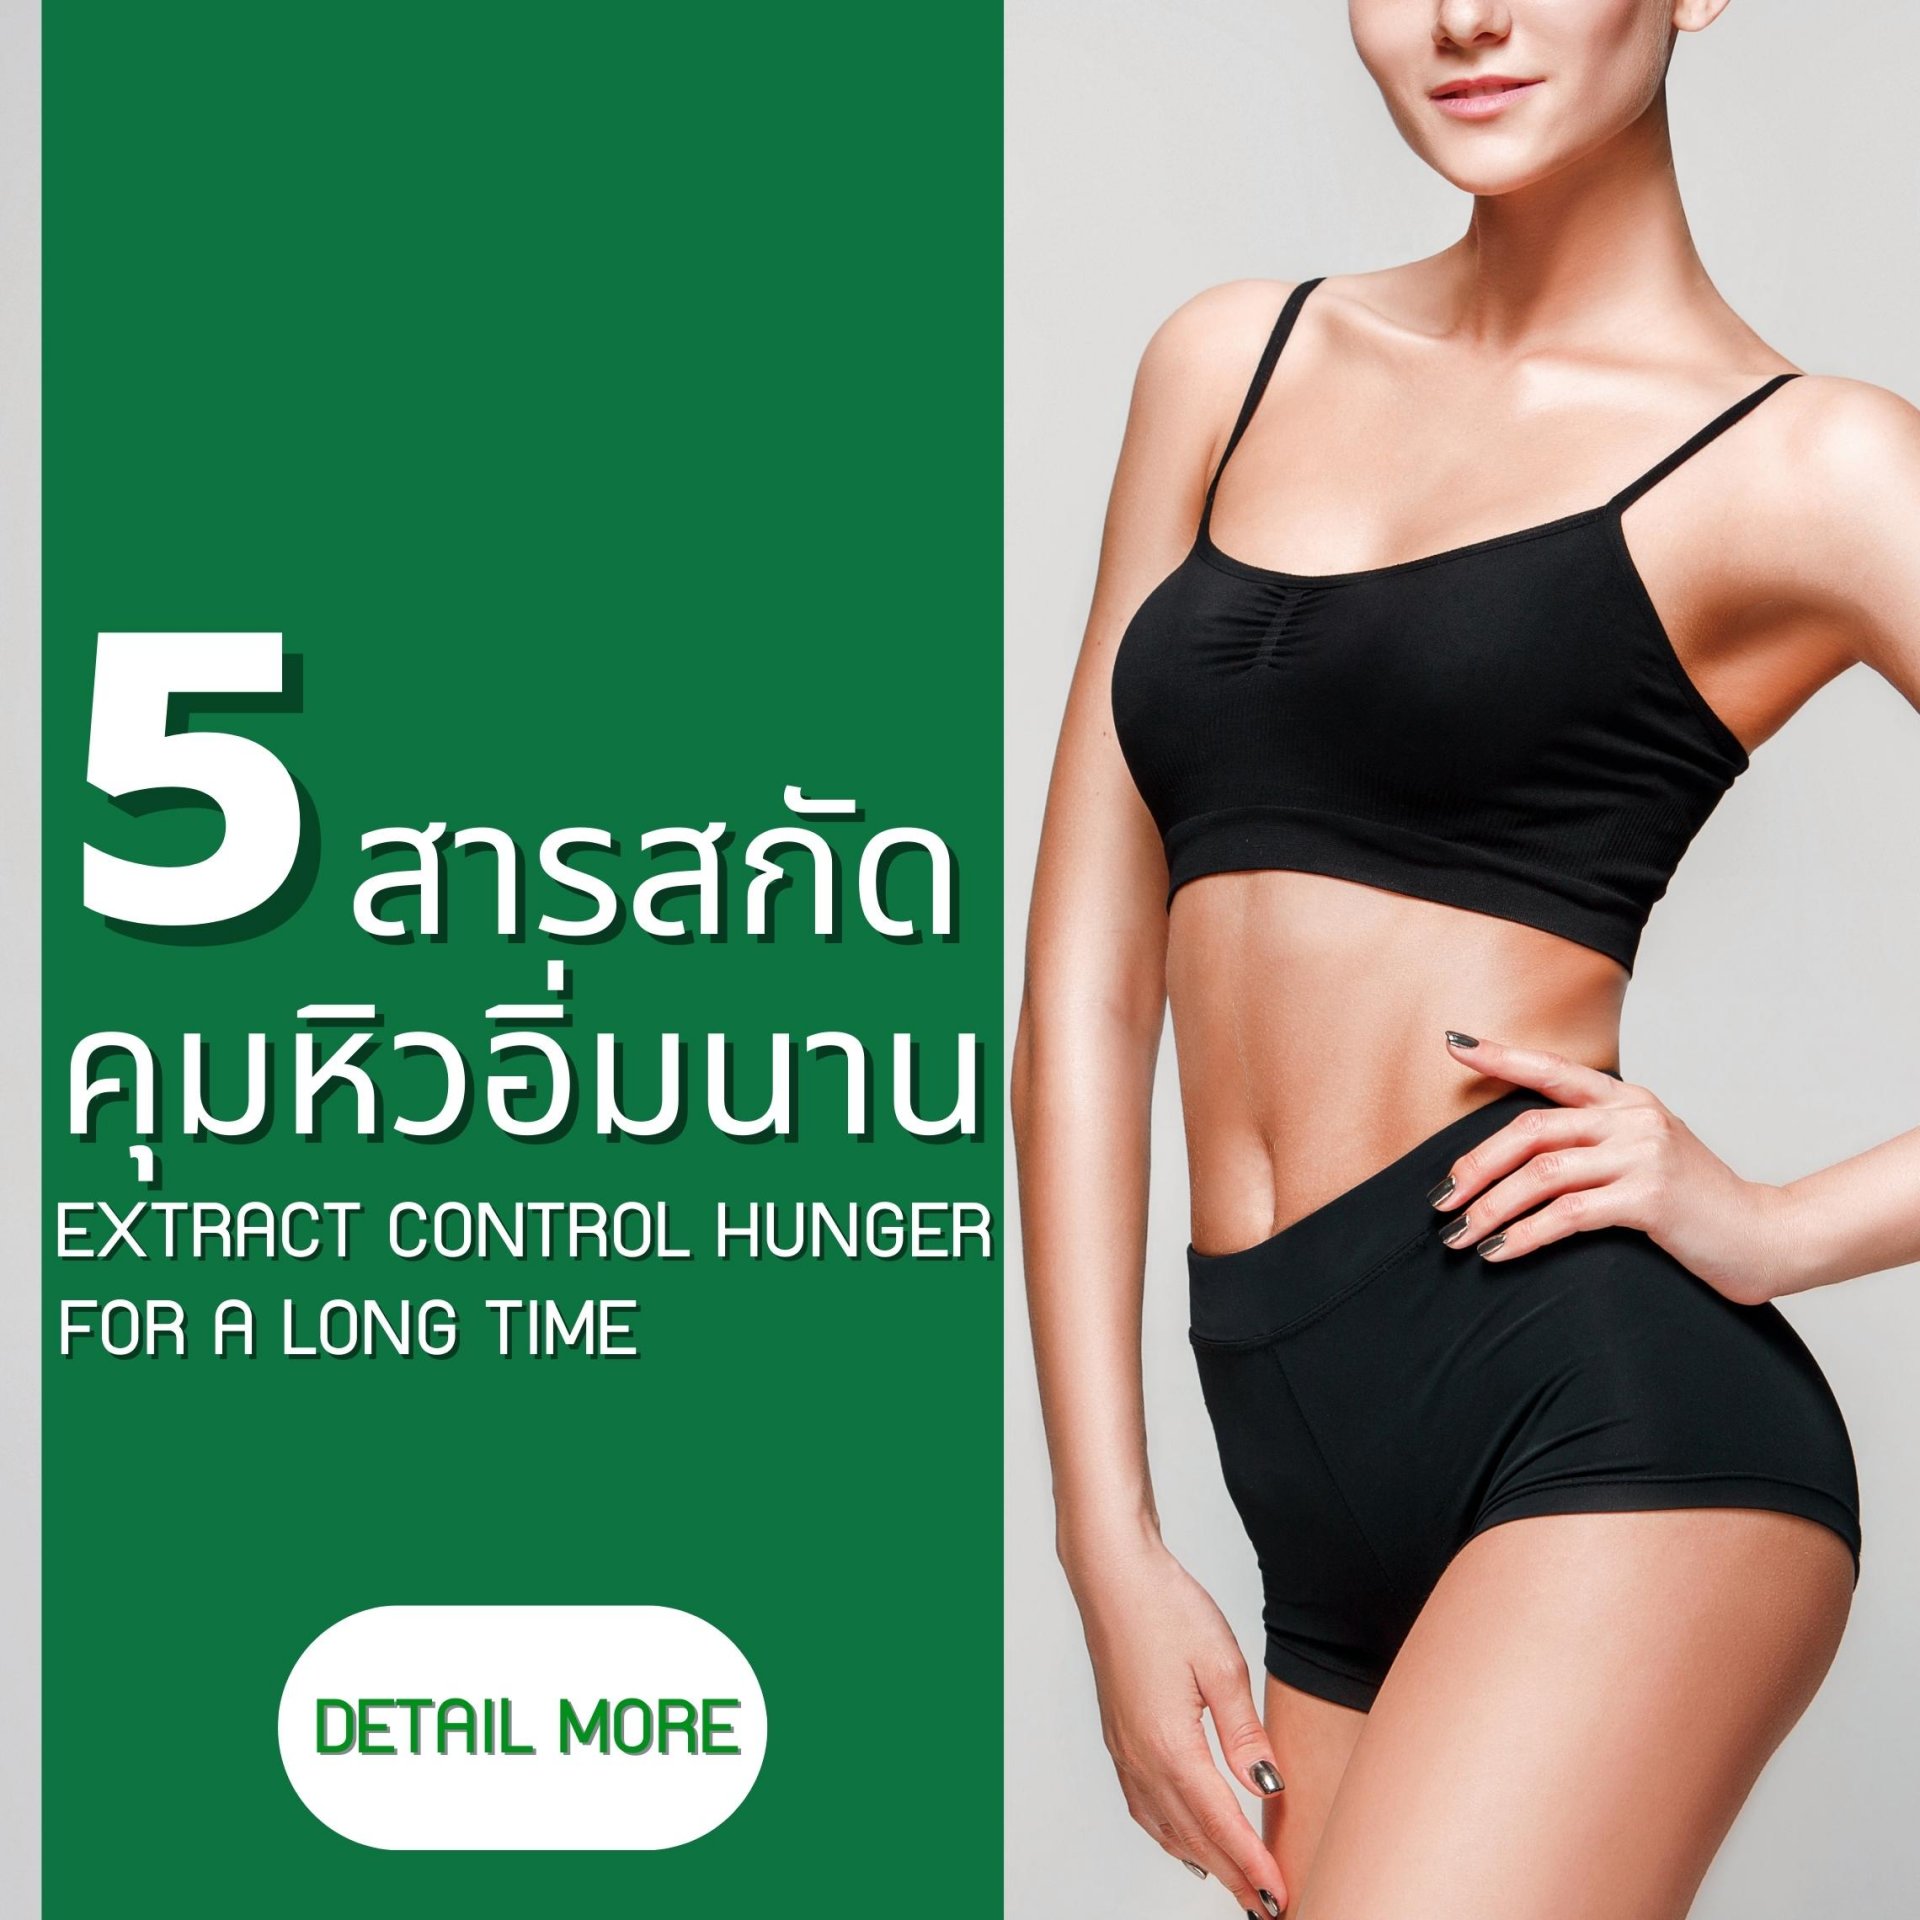 5 Extract Control Hunger For a Long Time